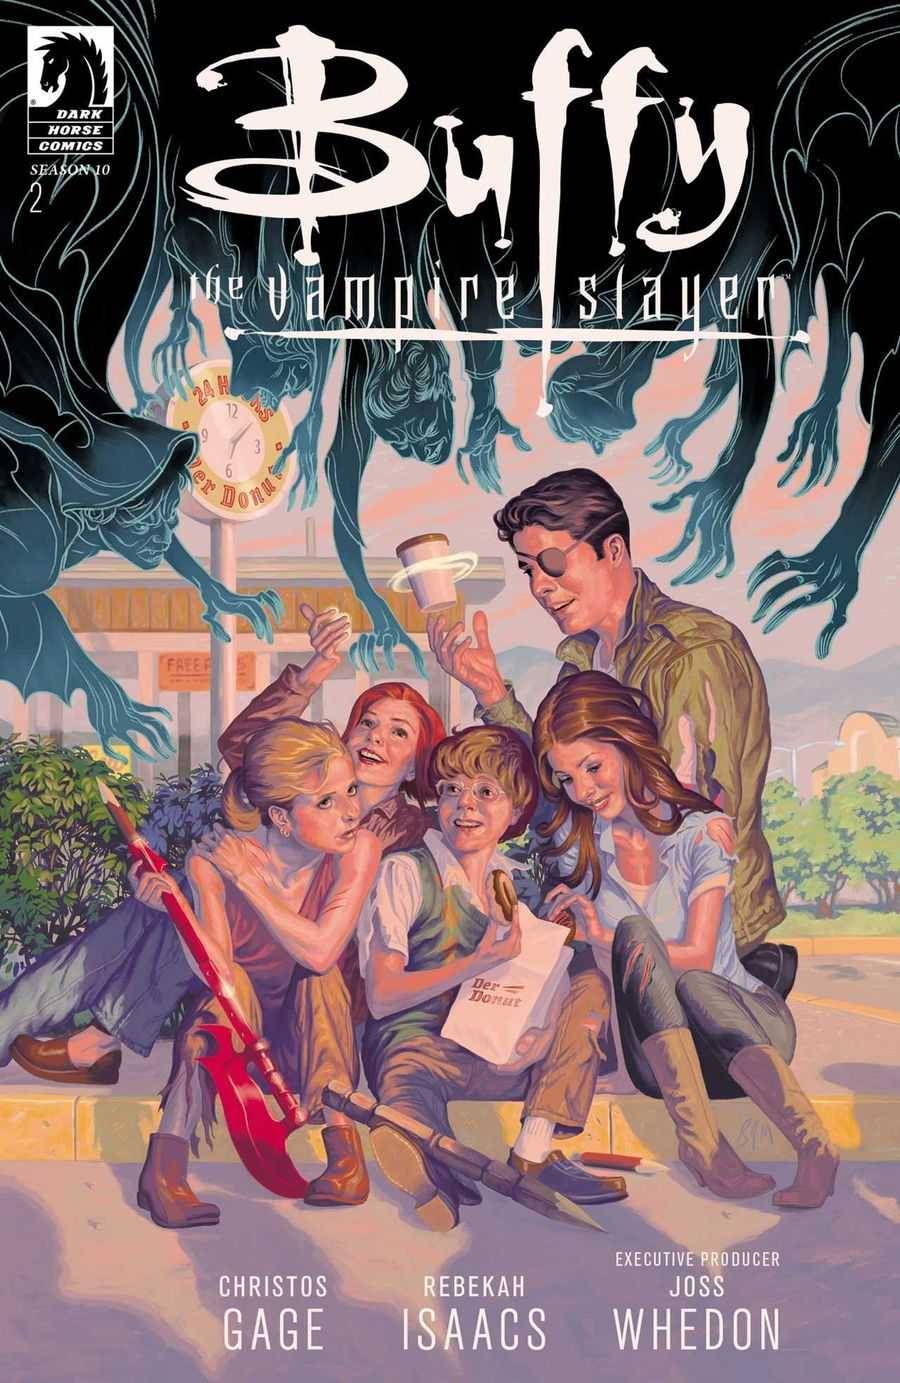 Buffy the Vampire Slayer Season 10 #2 (Comics Review)
Dark Horse brought back its mainline Buffyverse titles for their tenth “season” last month with the first issues of…